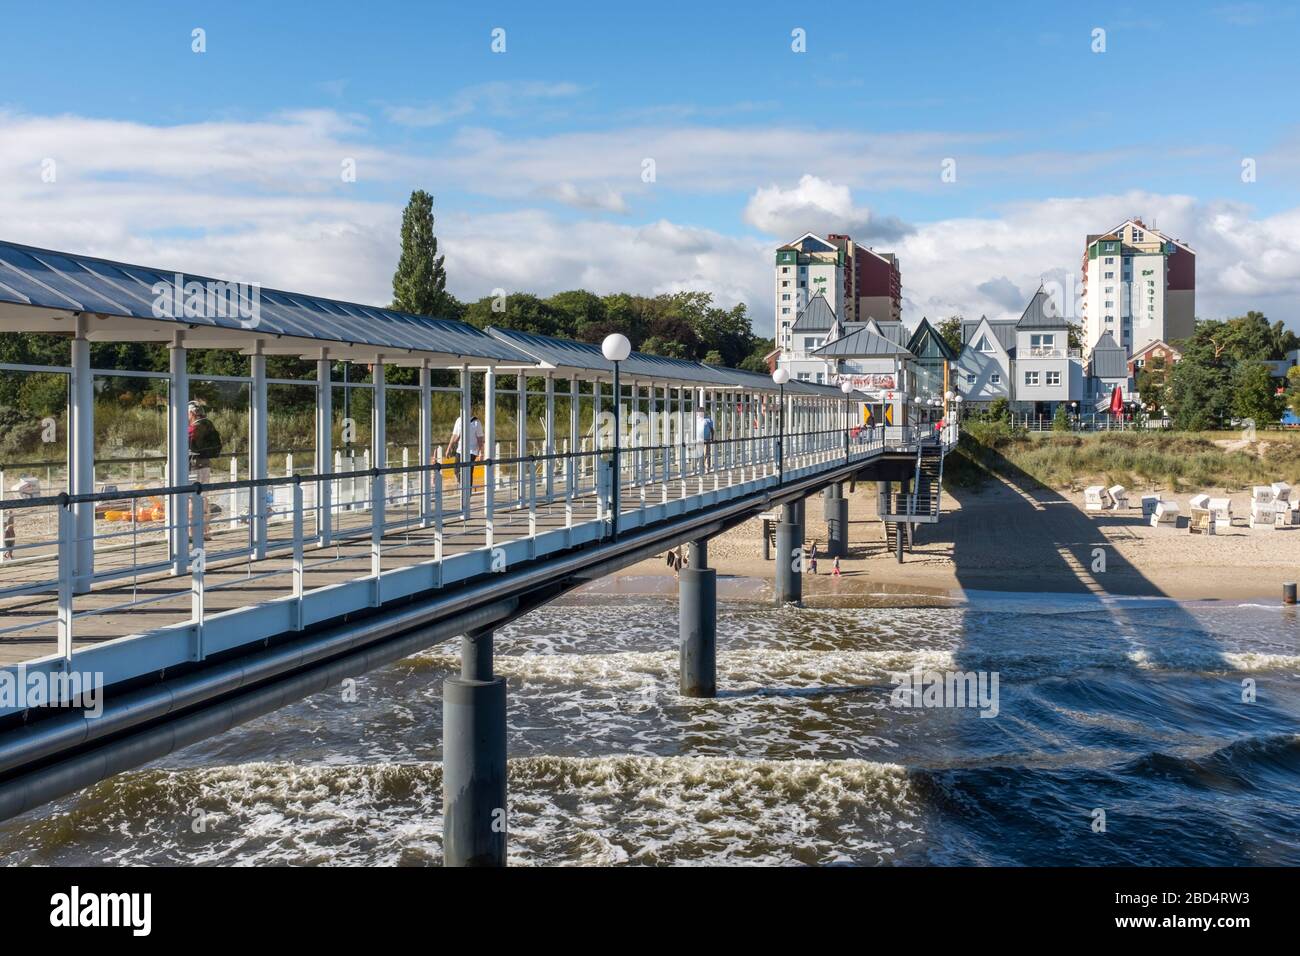 The pier, known as Seebrücke in German, at Heringsdorf on the island of Usedom, Baltic Coast, Germany Stock Photo